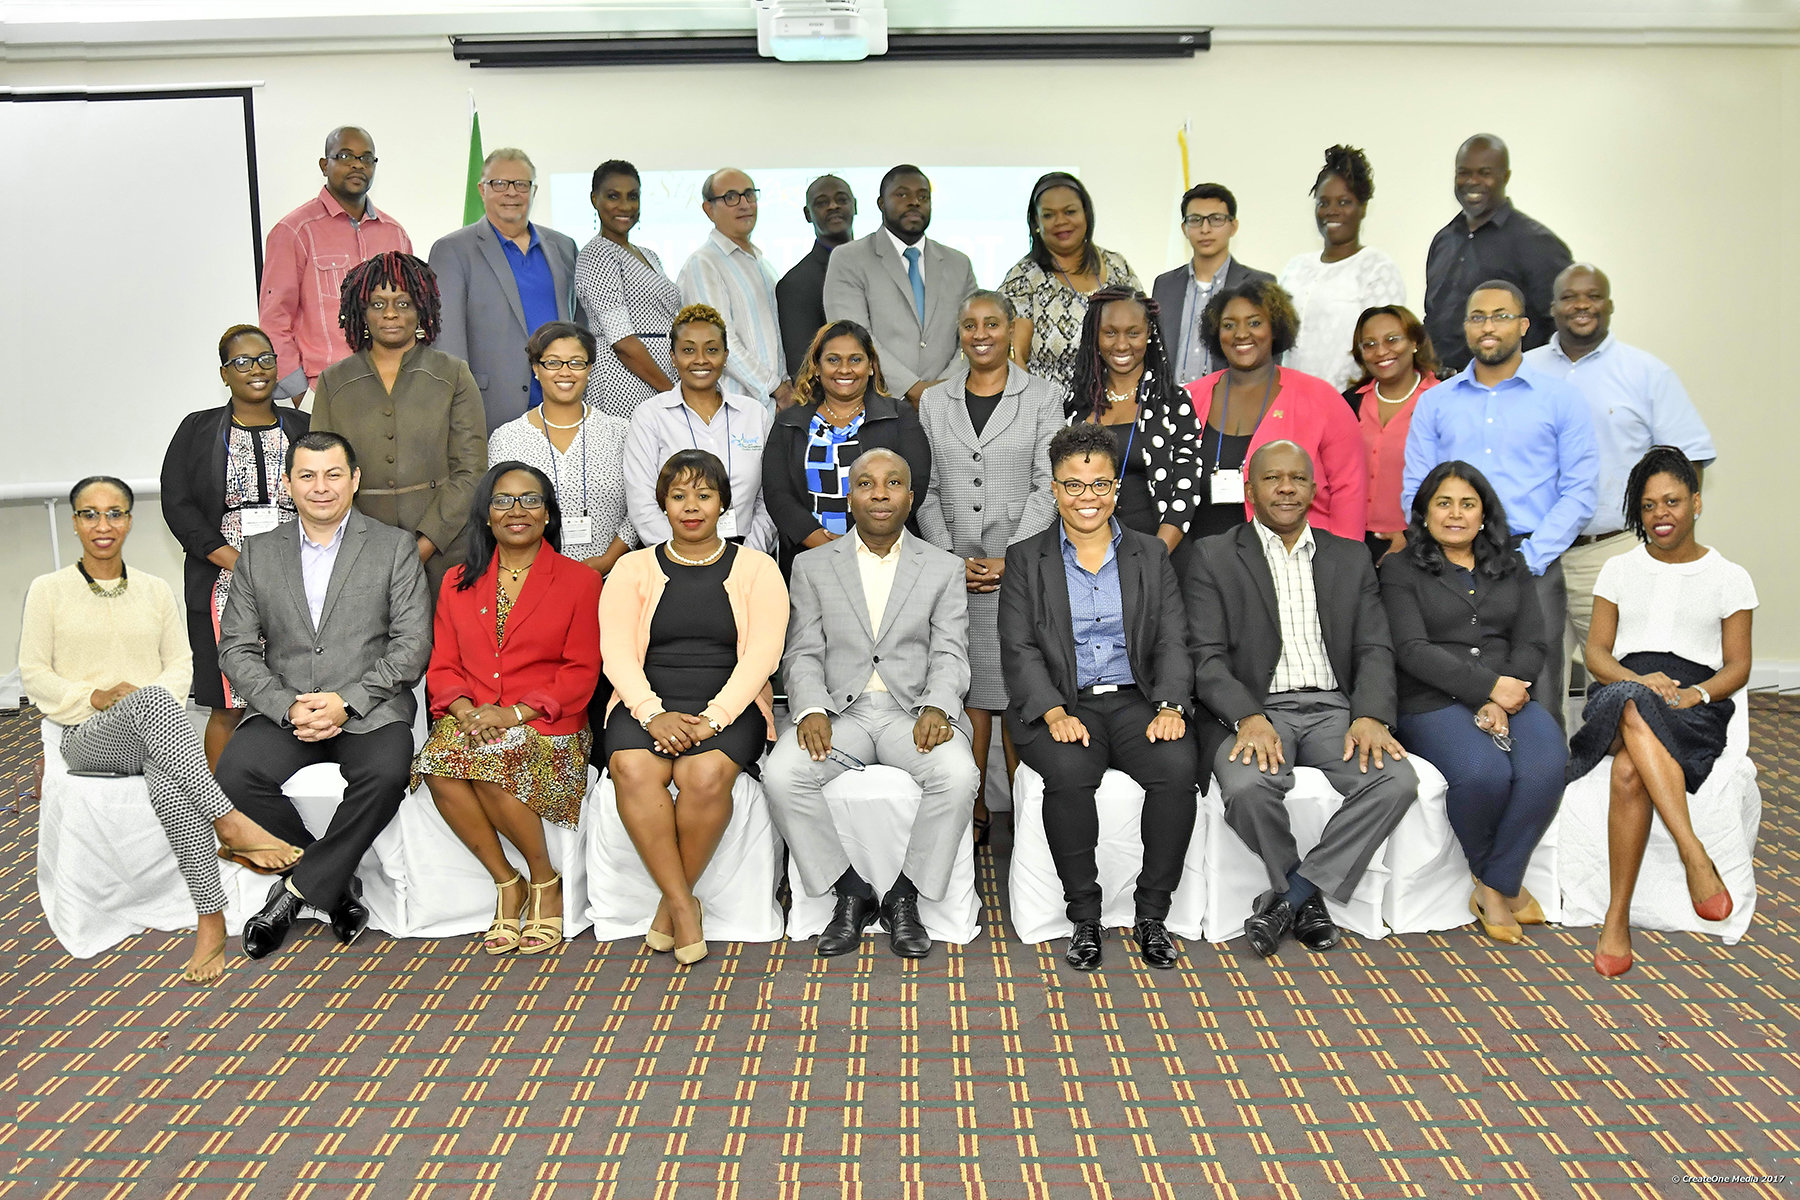 The Forum brought together local, regional, and international representatives from public and private sector tourism entities, as well as development agencies.